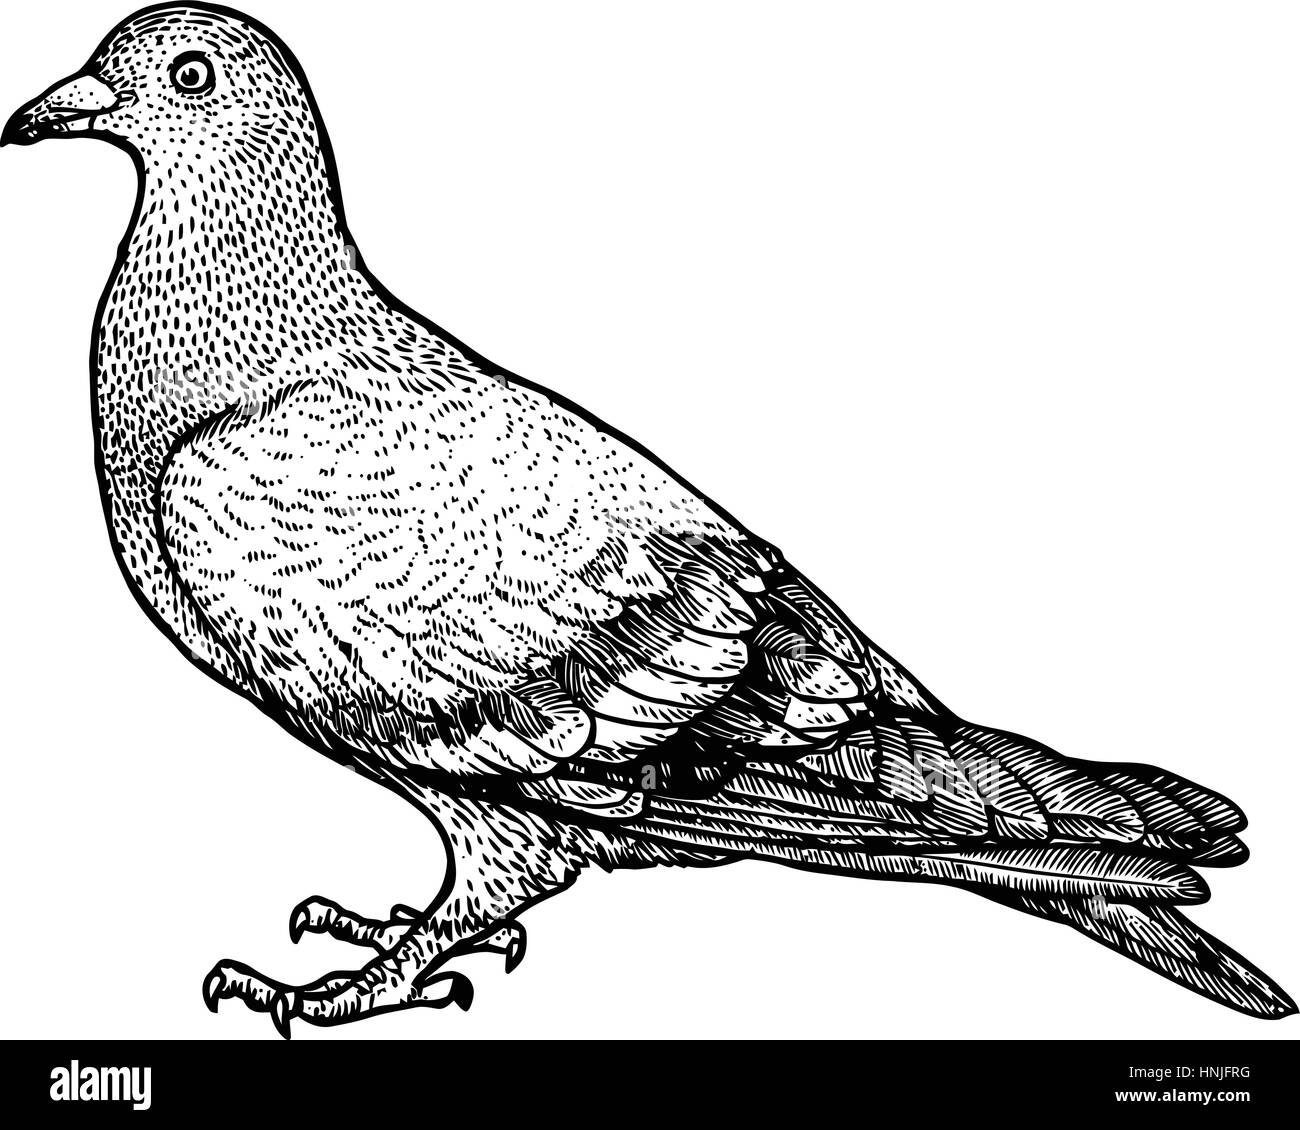 how to draw pigeon flying drawing easy step@DrawingTalent - YouTube